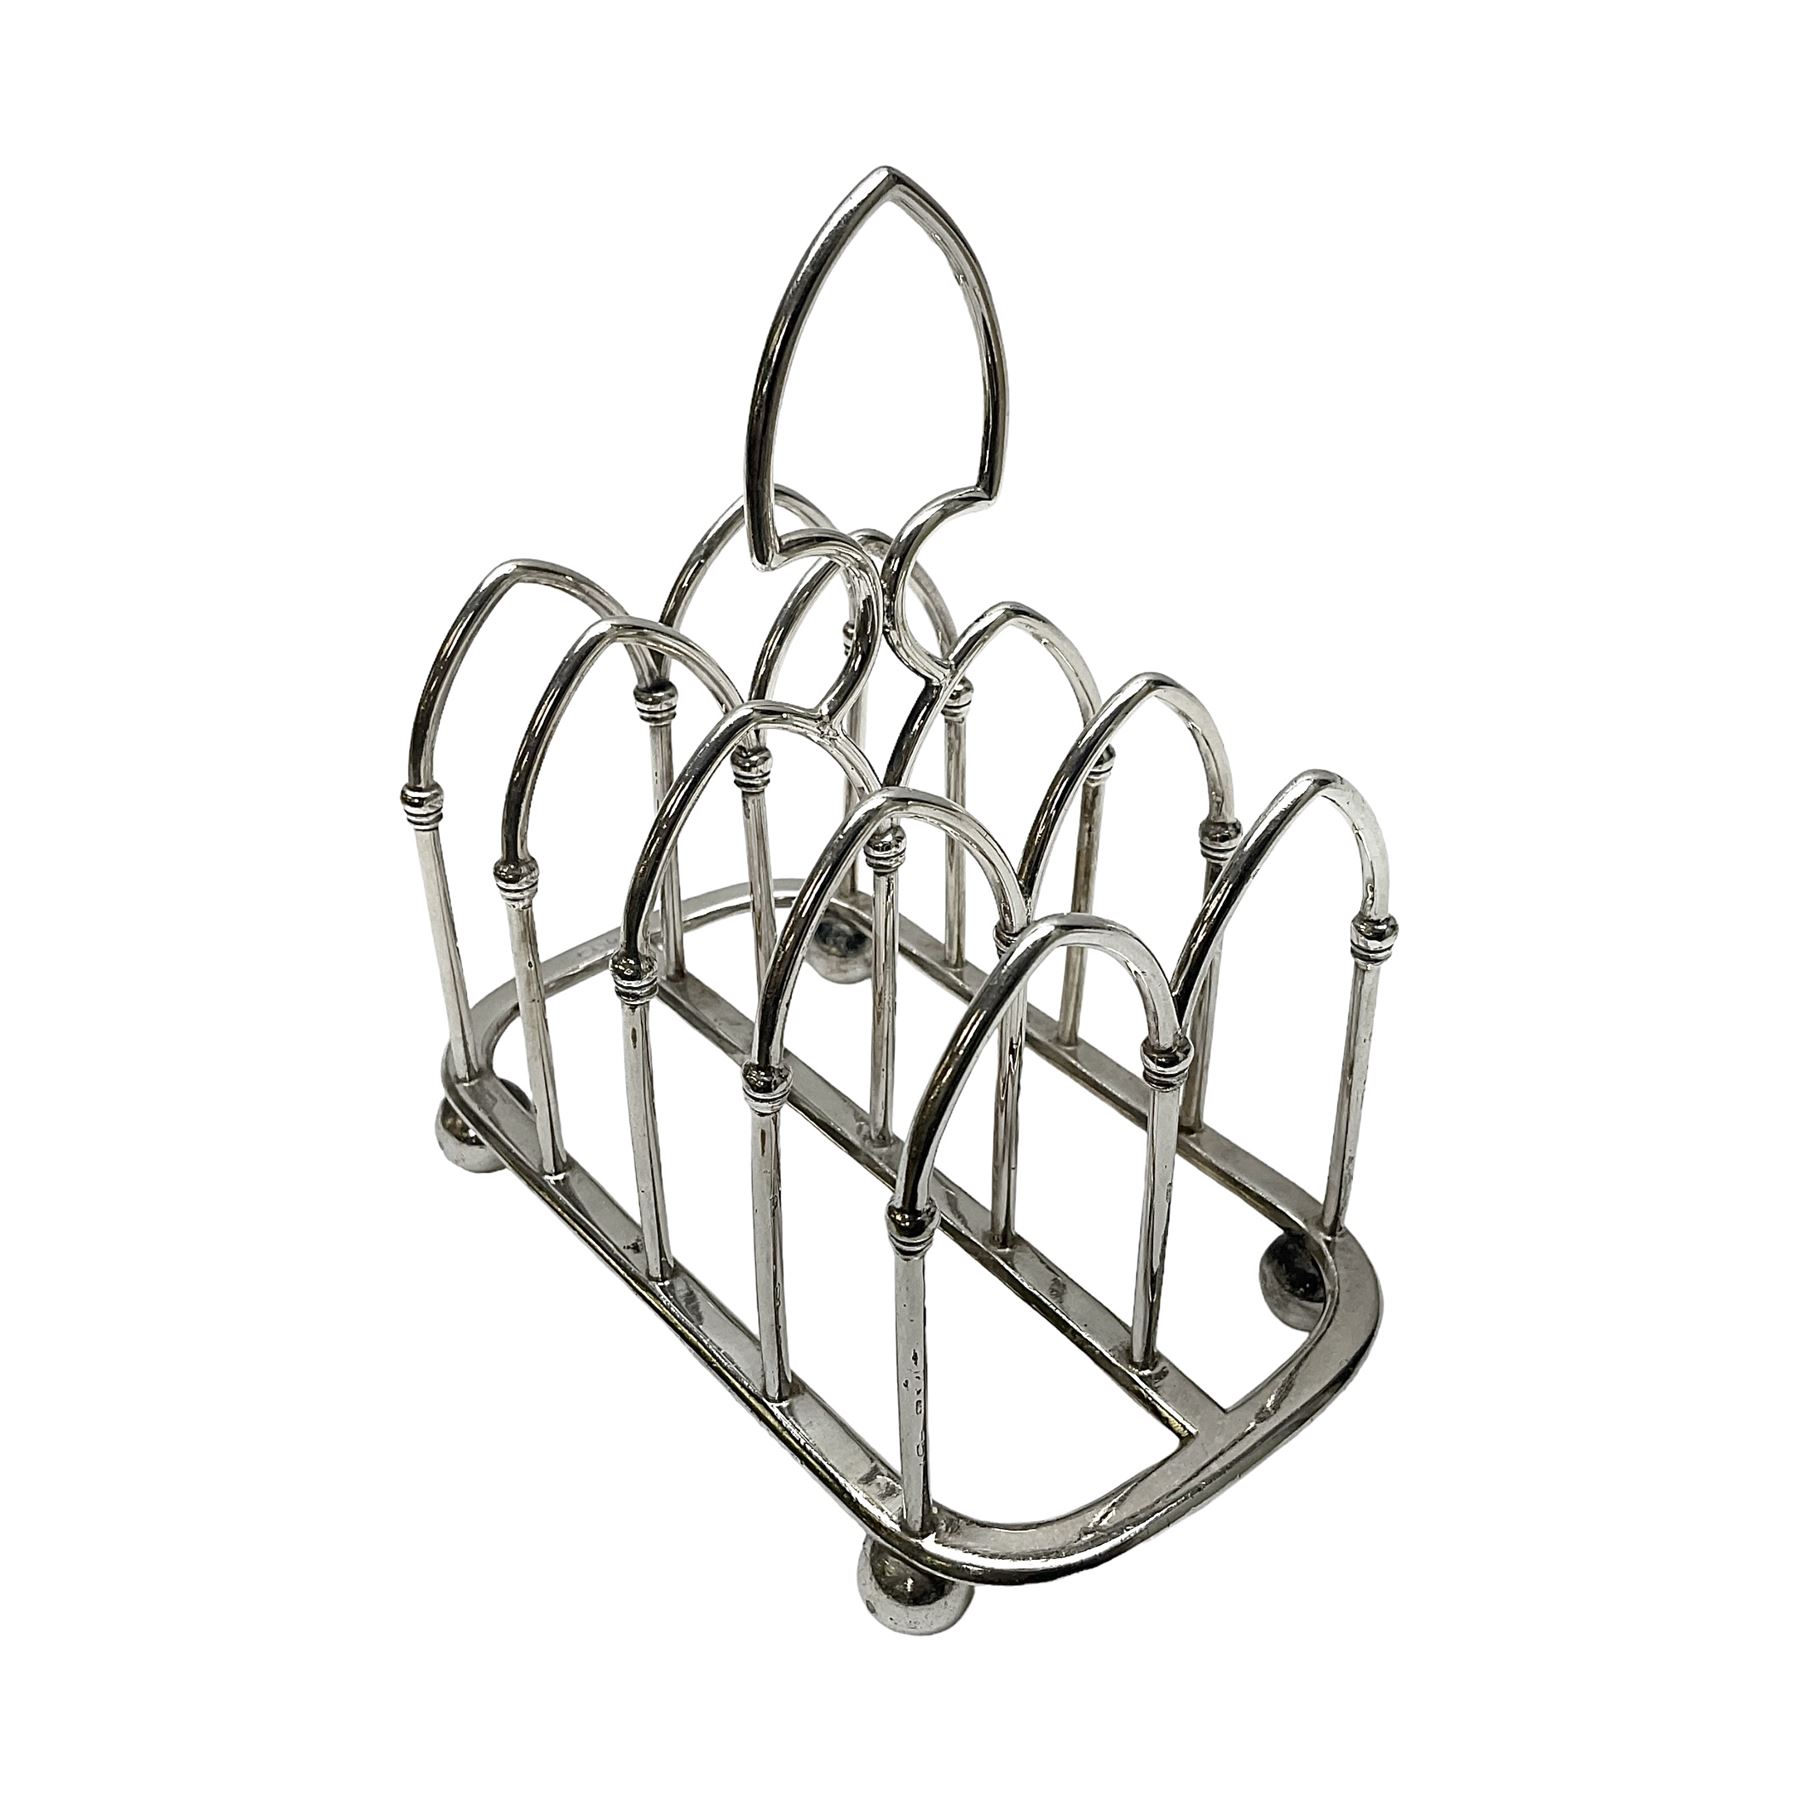 Silver plated toast rack